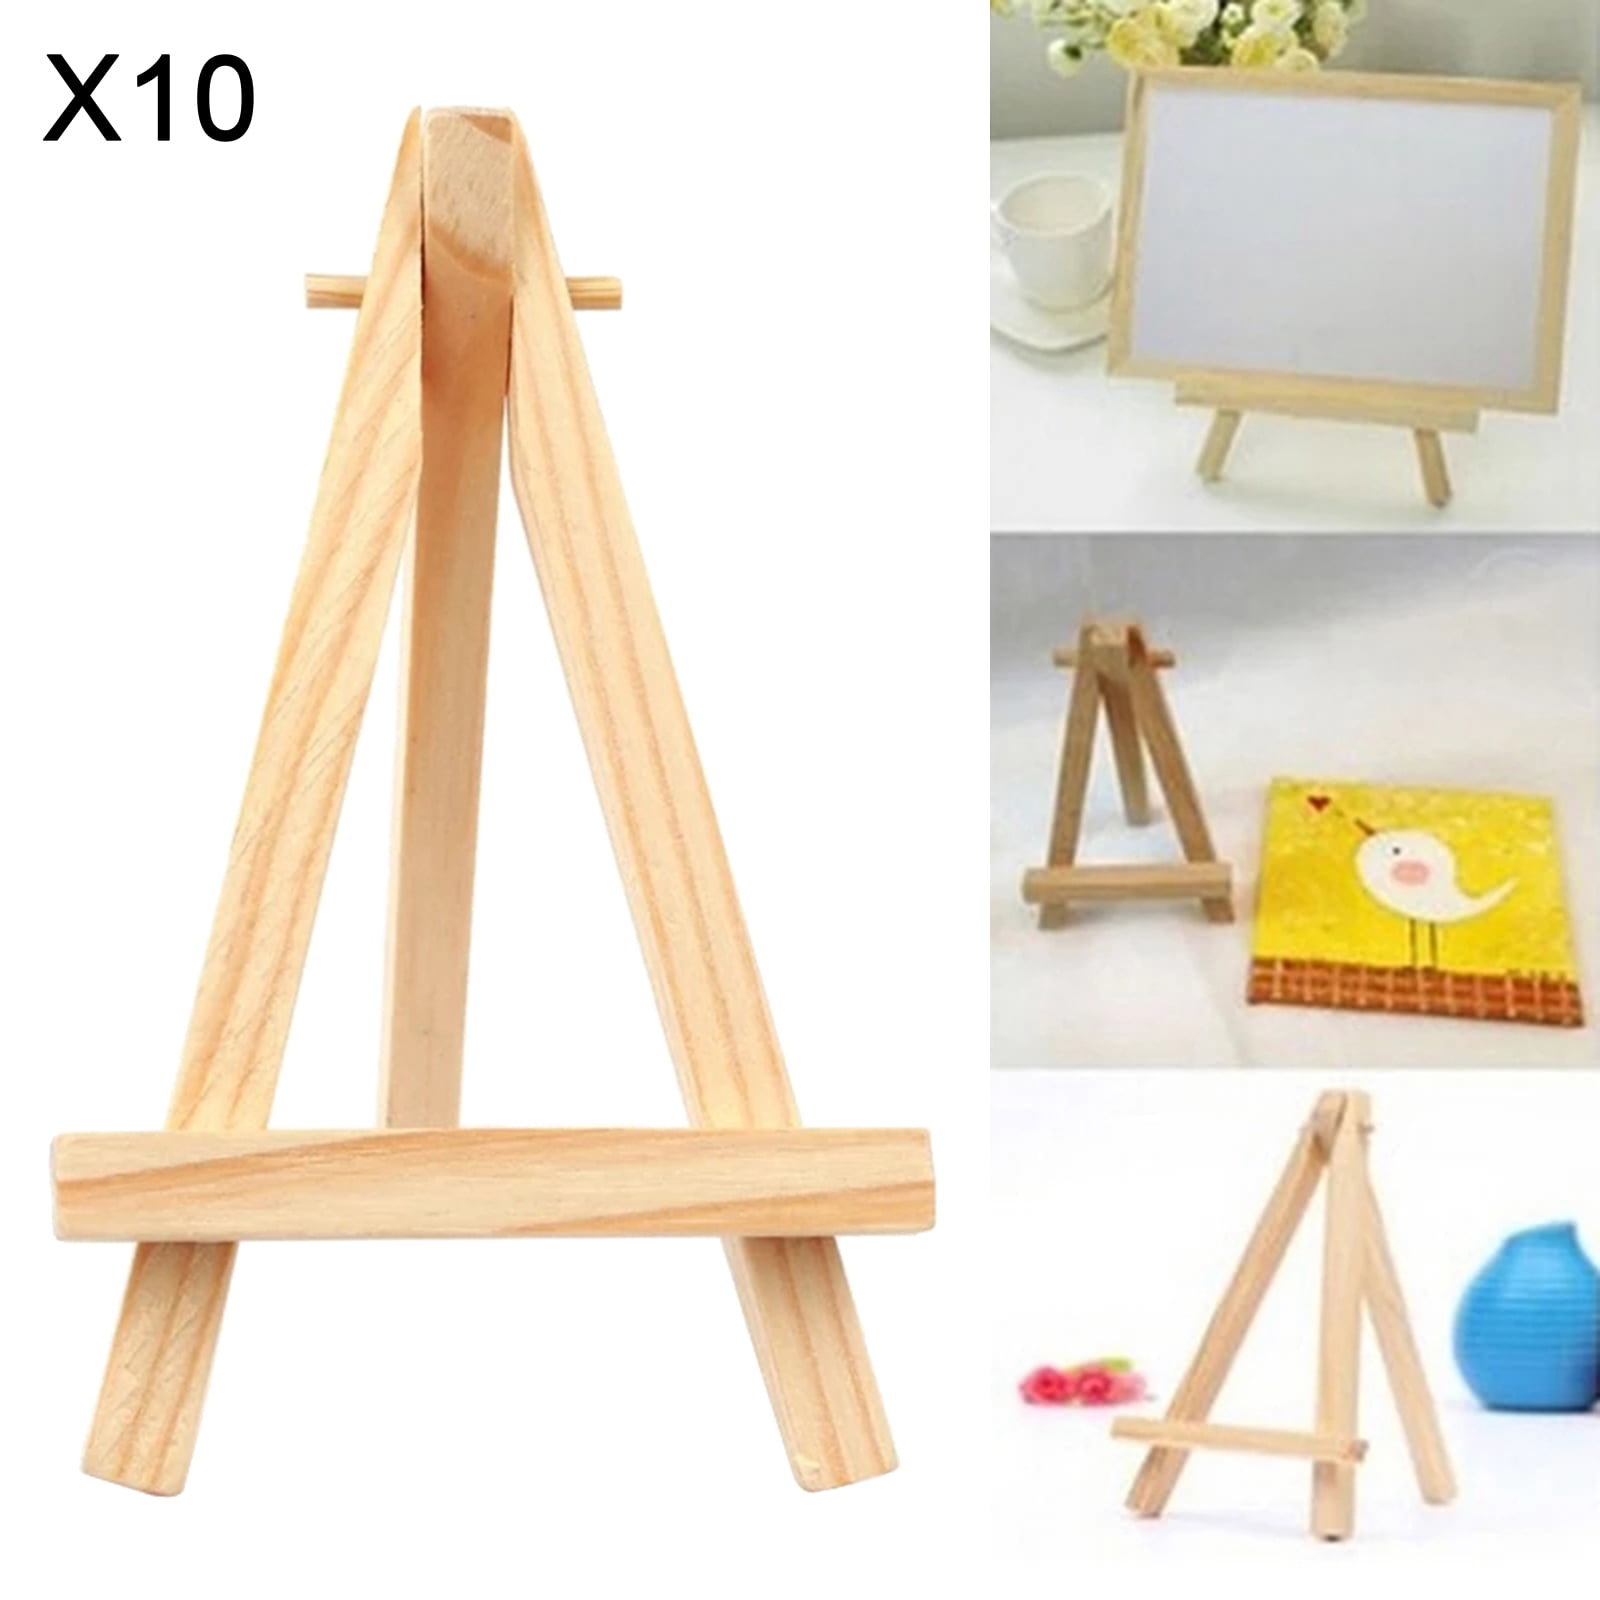 10pcs Wooden Easel, 5 inch Small Wood Display Easel Tabletop Holder Stand  for Kids Crafts, Business Cards, Signs, Photos - AliExpress